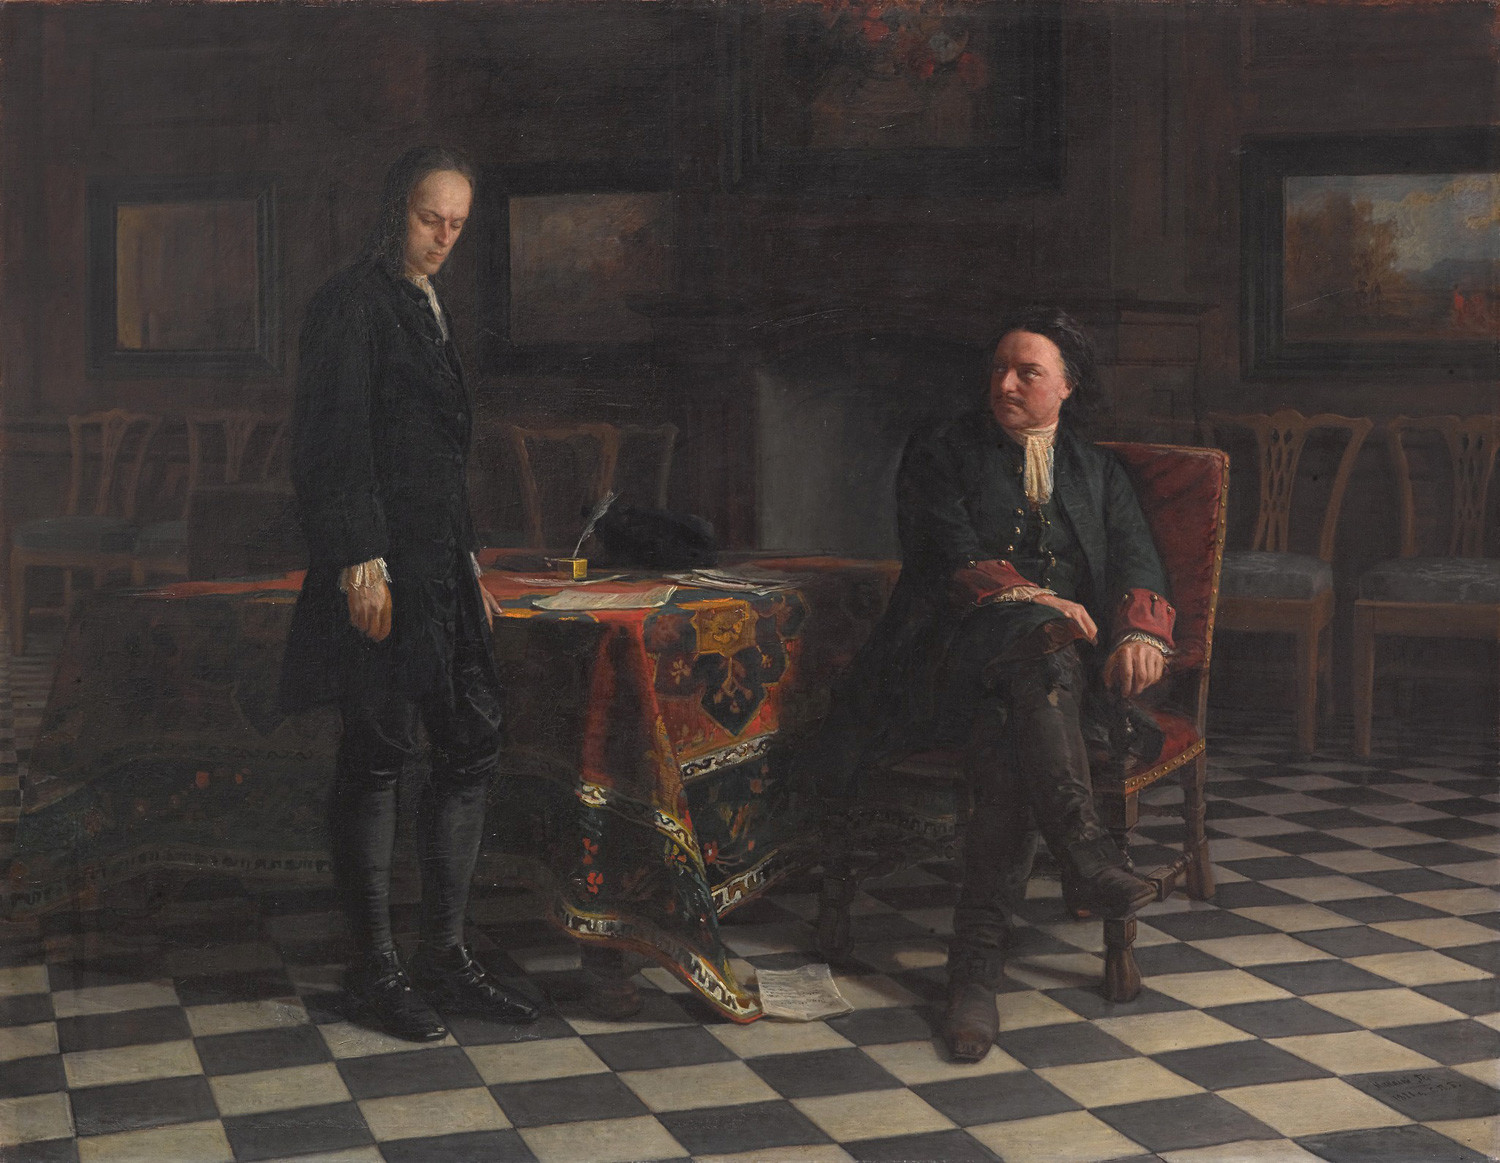 'Peter I (the Great) Interrogating Tsarevich Alexei Petrovich in Petergof' by Nikolai Ge